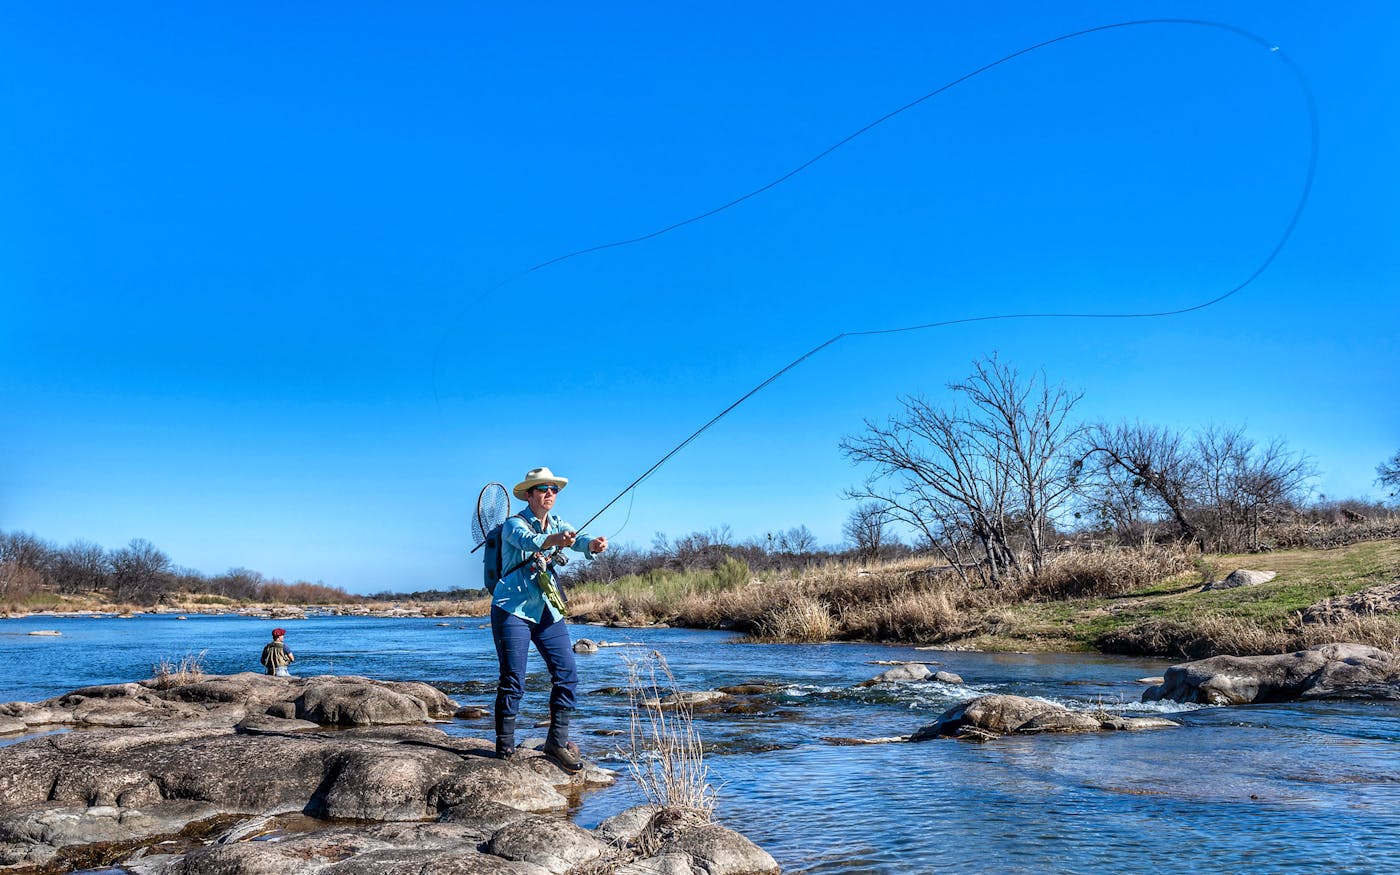 Texas Women Fly-fishers Are Angling for Respect – Texas Monthly